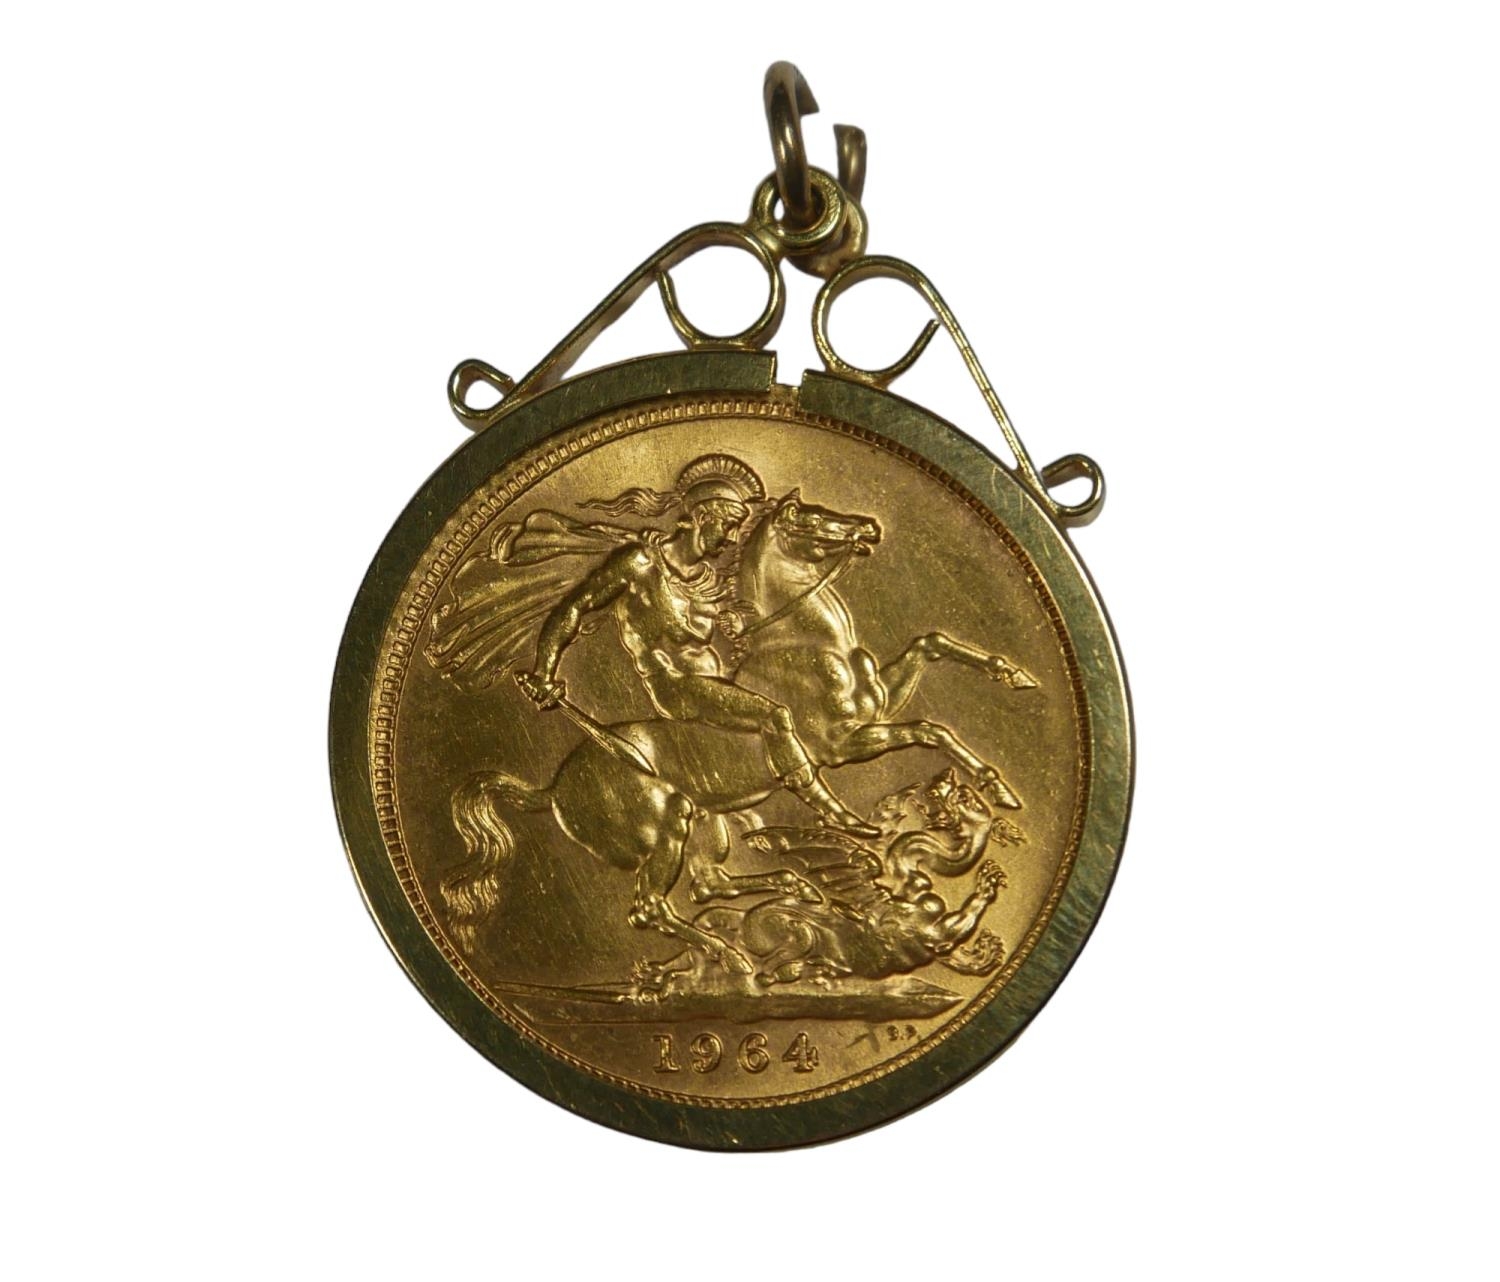 A 1964 FULL GOLD SOVEREIGN, PLACED IN A 9CT GOLD PENDANT MOUNT. (34mm x 24mm, 9.4g) - Image 3 of 3